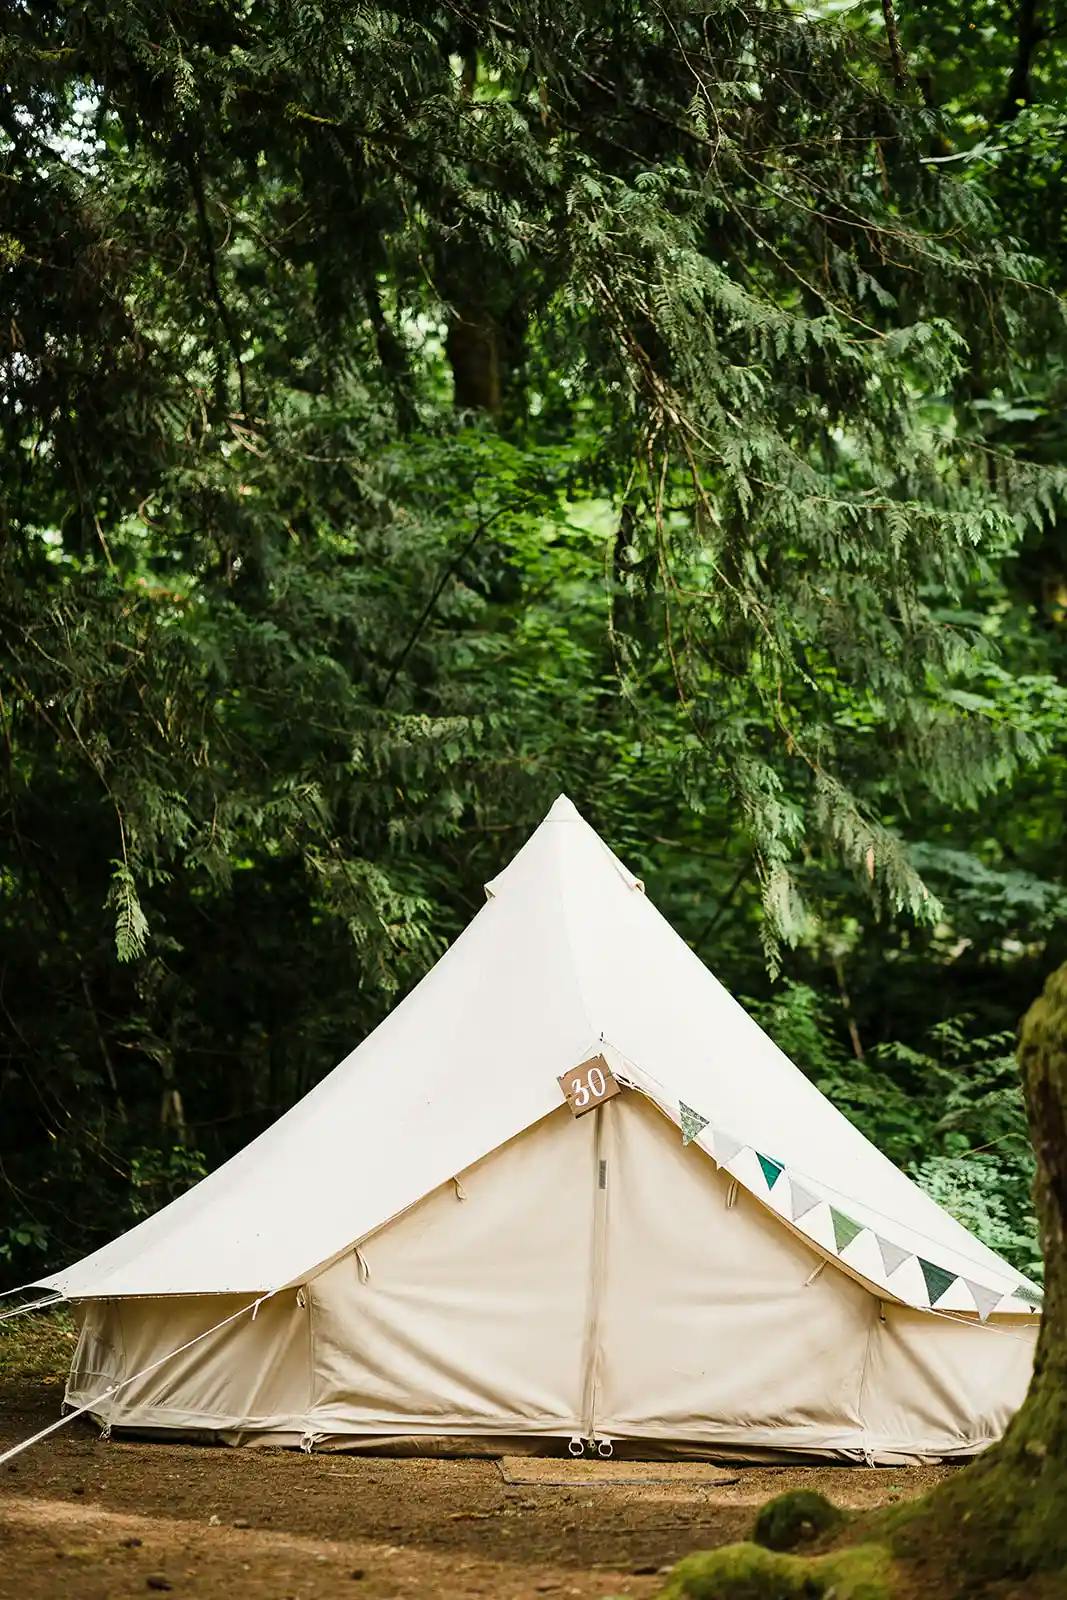 White tent pitched in a lush forest.